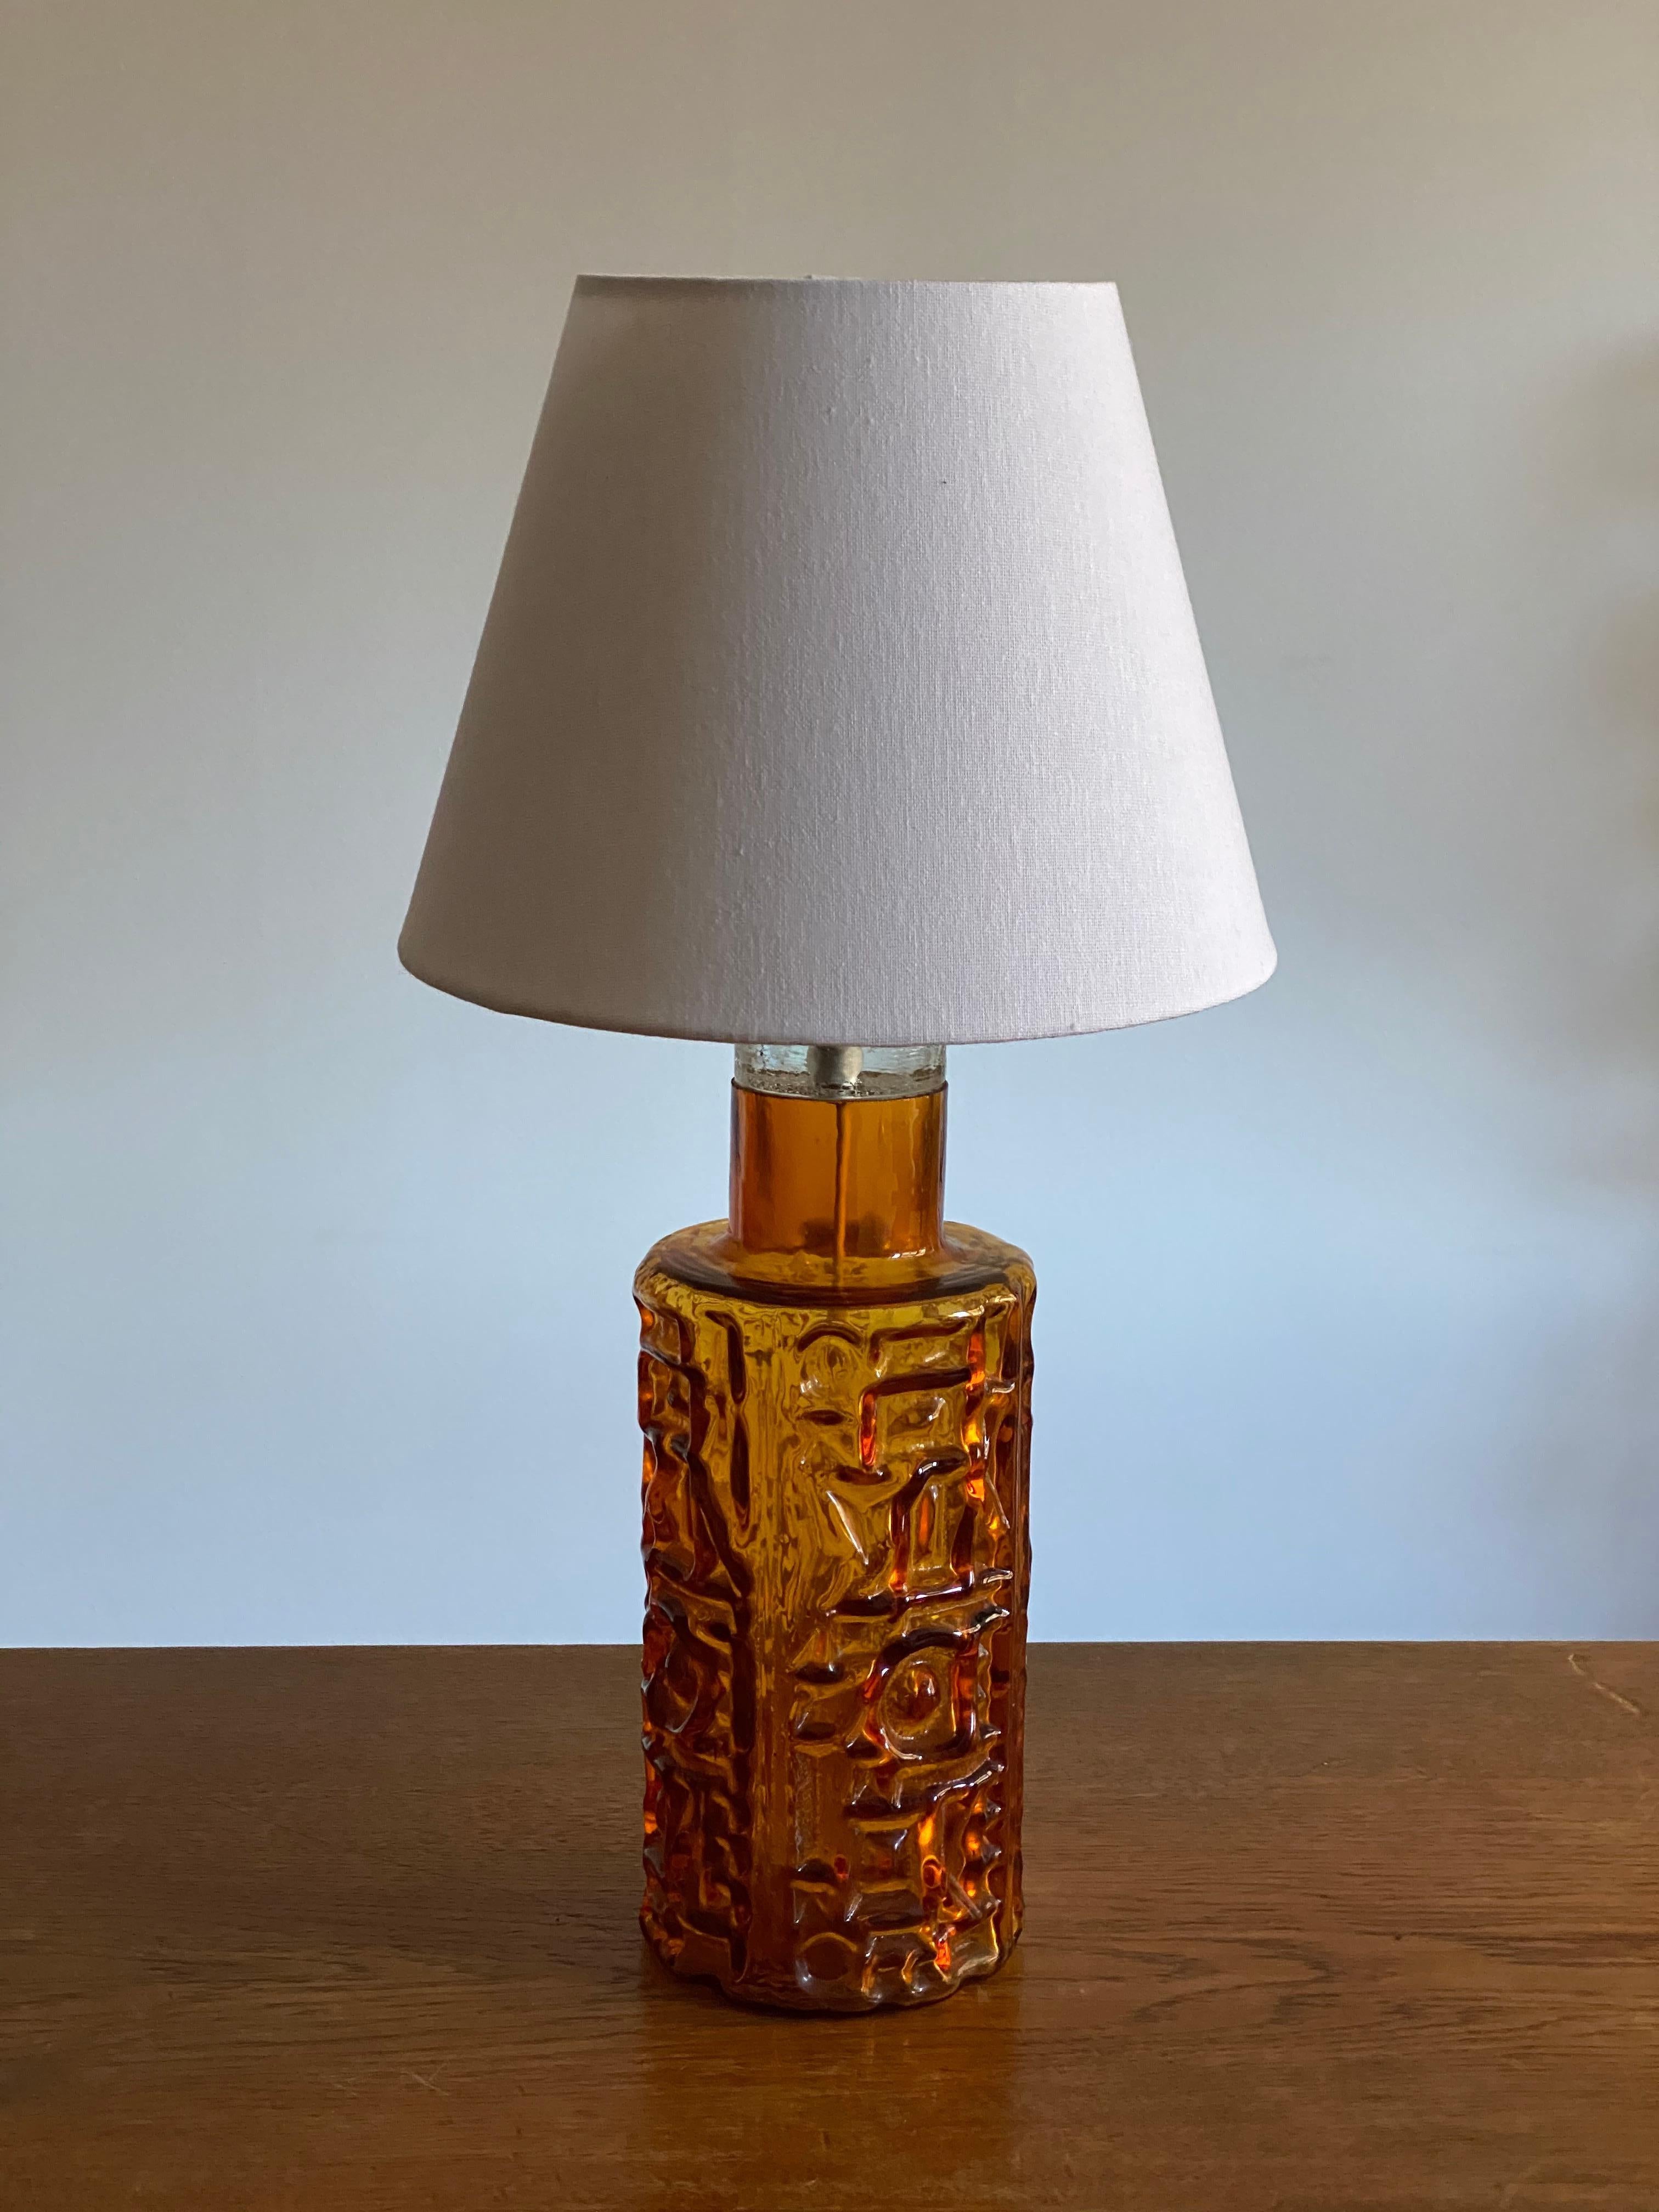 A highly modernist organic table lamp. Of Swedish production. In highly ornamented and colored glass, 1950s. 

Lampshade in first image is not included in the purchase. Stated measurements are without a lampshade.

Other designers of the period